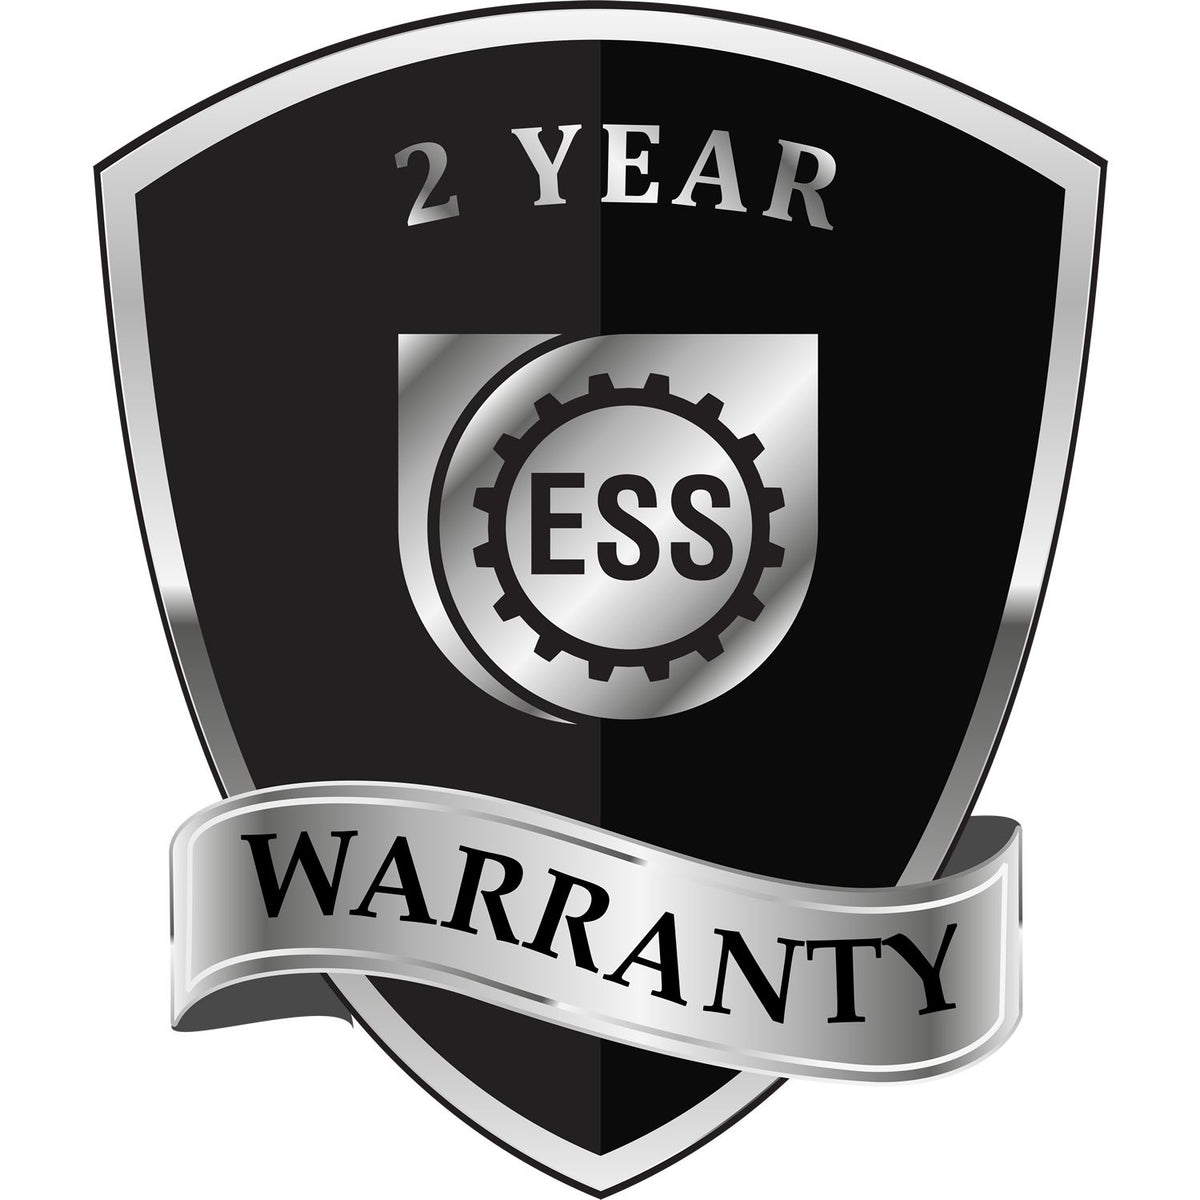 A black and silver badge or emblem showing warranty information for the Long Reach Indiana Geology Seal